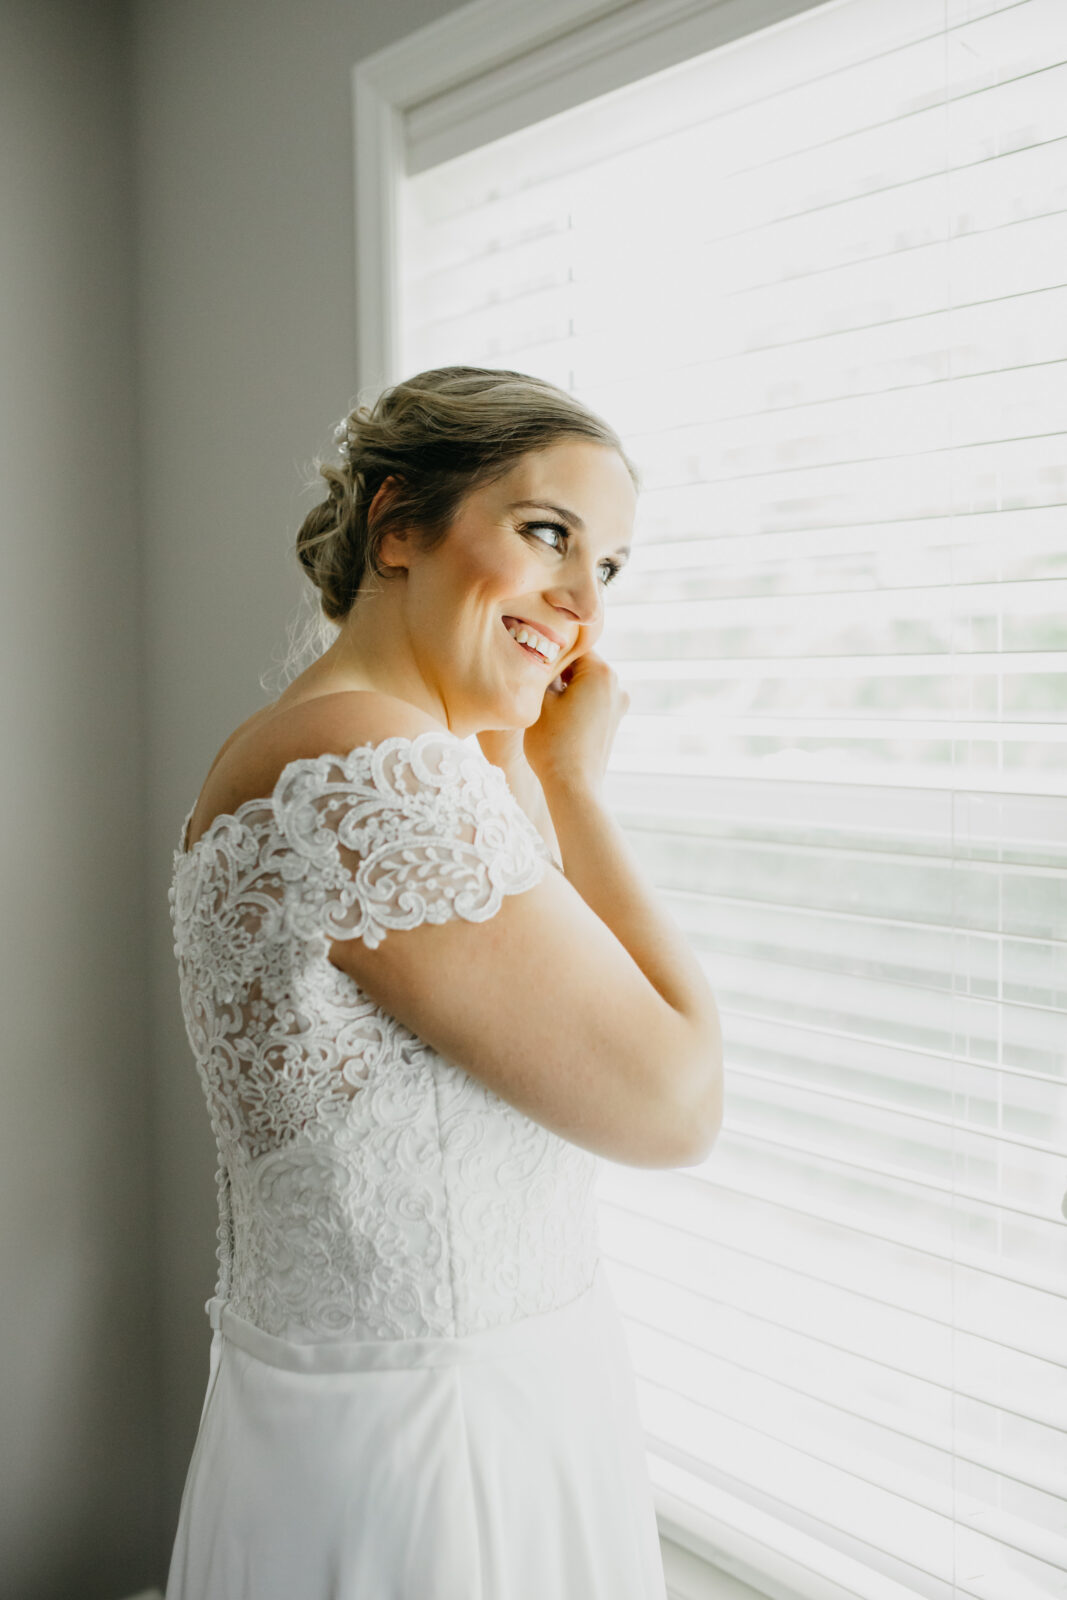 A photo of the bride during her preparation for her wedding day